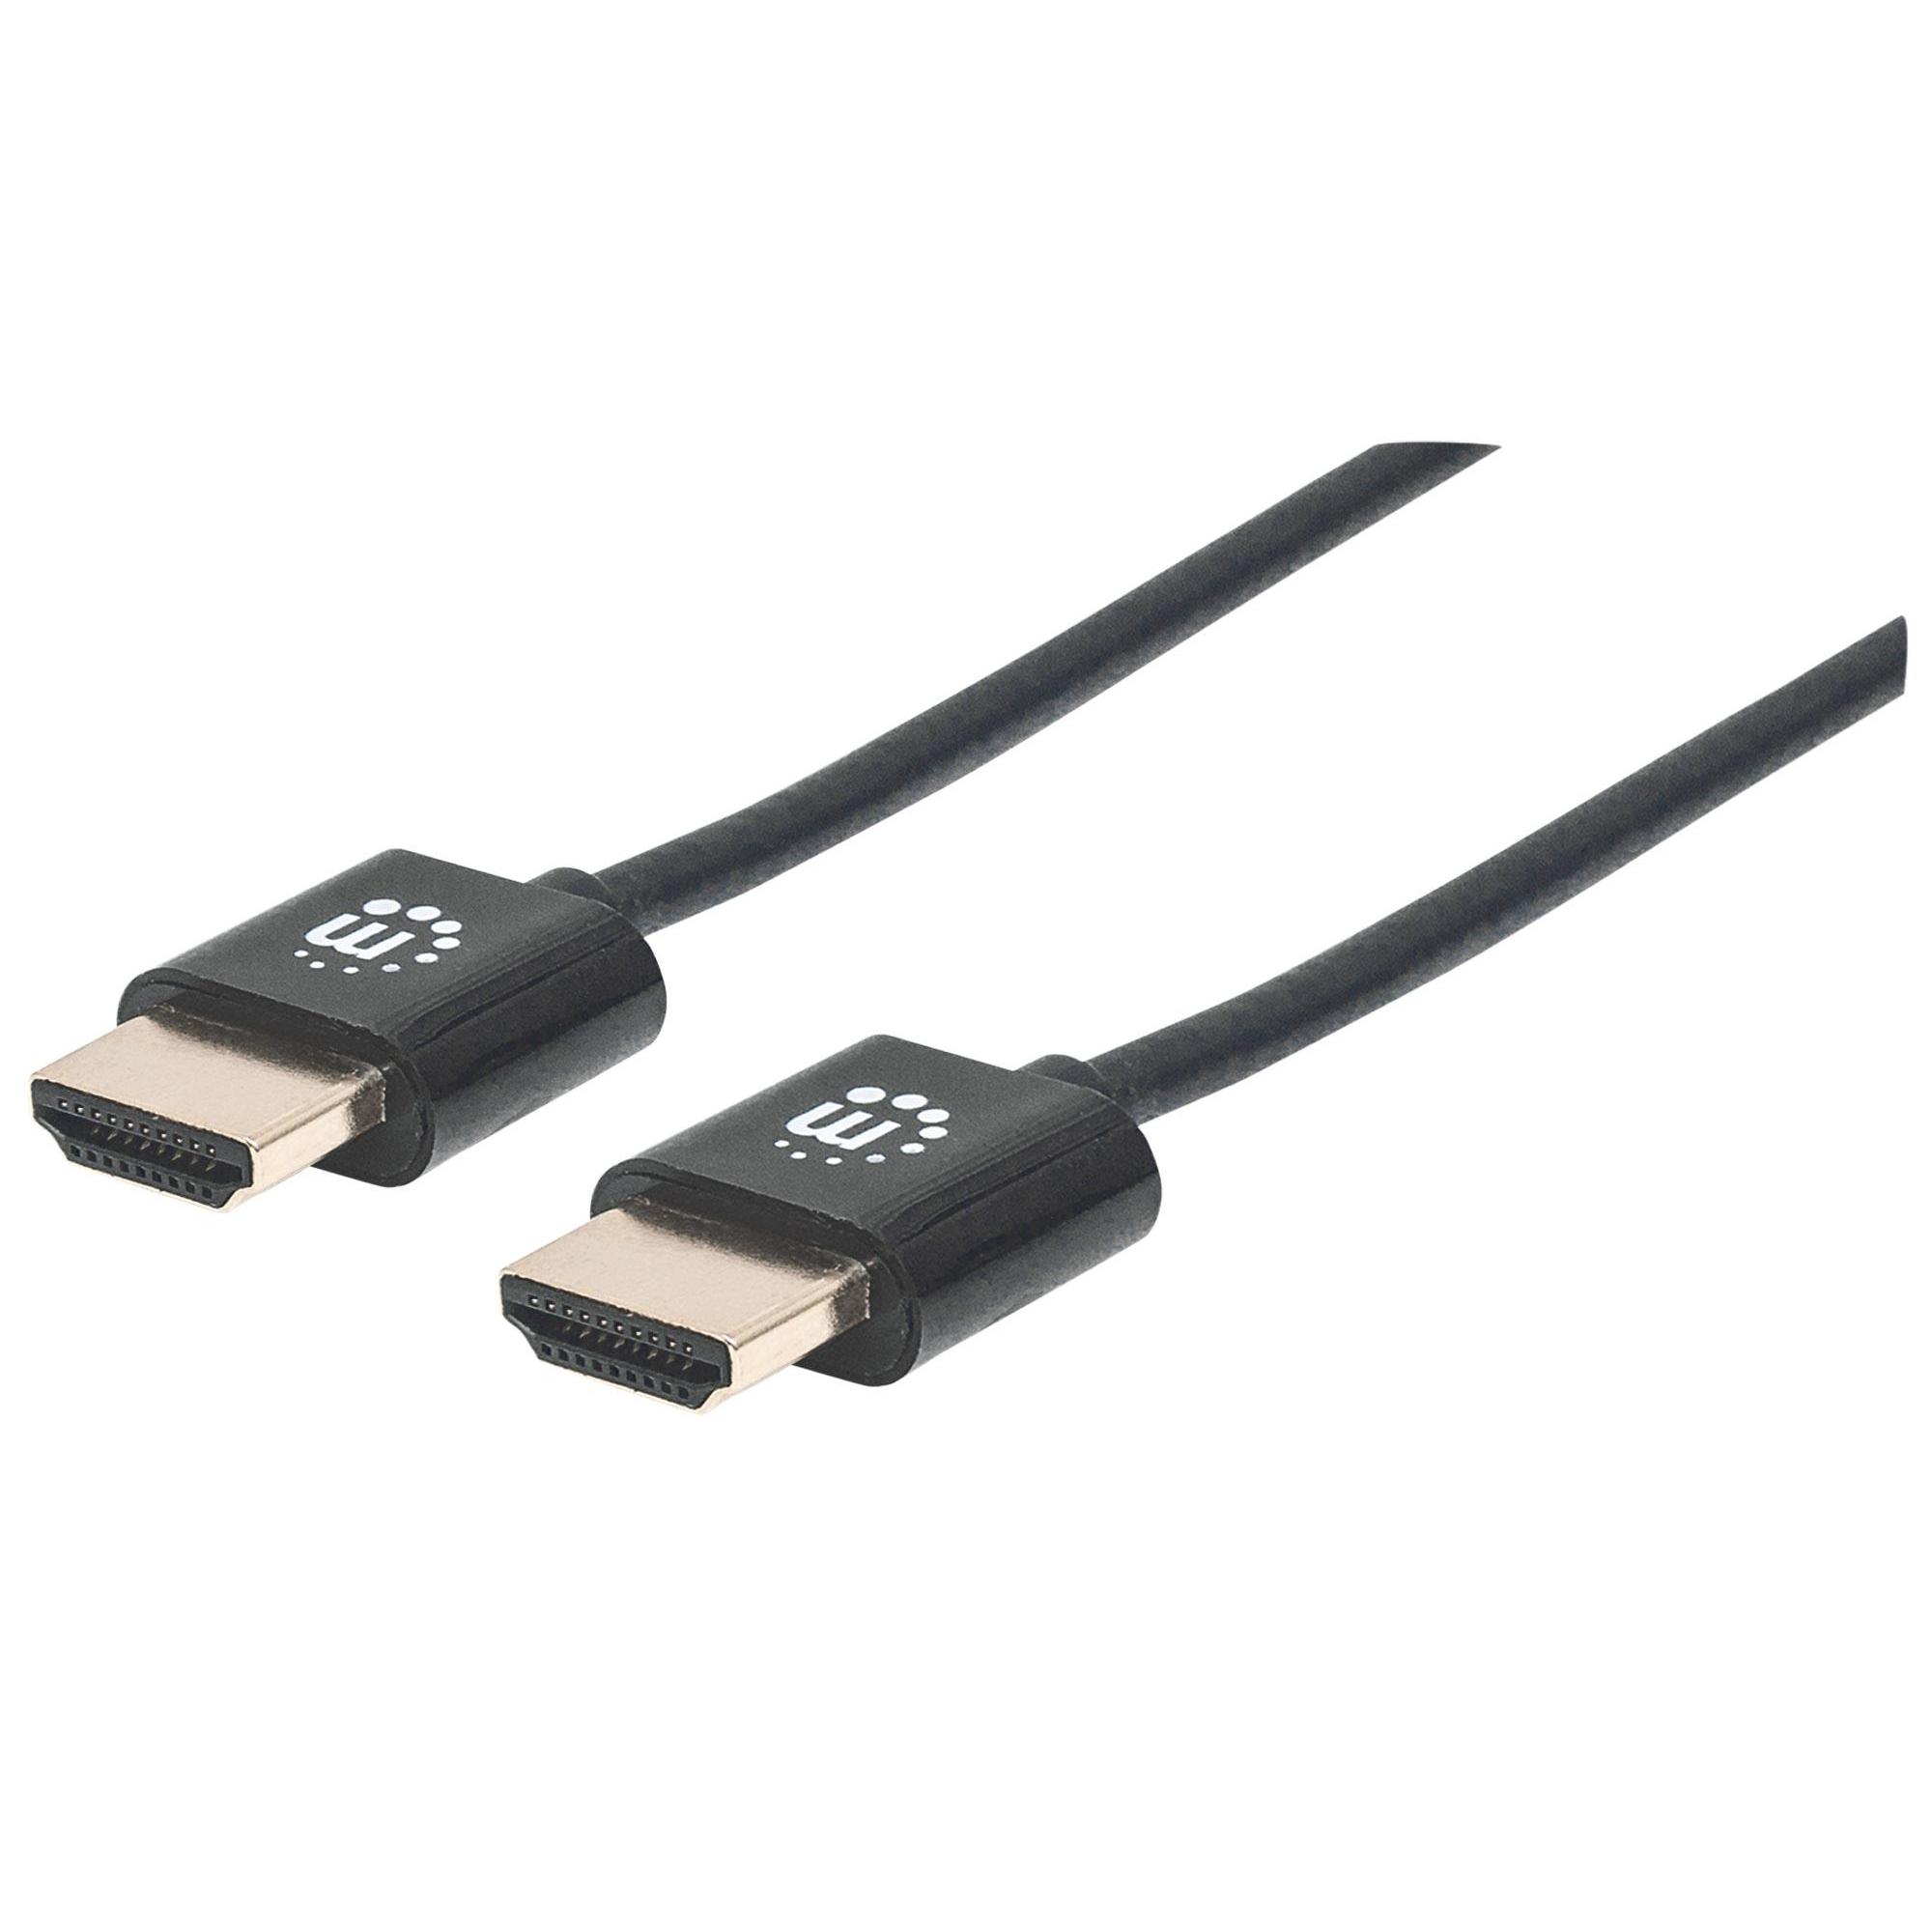 Cavo HDMI High Speed con Ethernet Ultra Sottile 0,5m